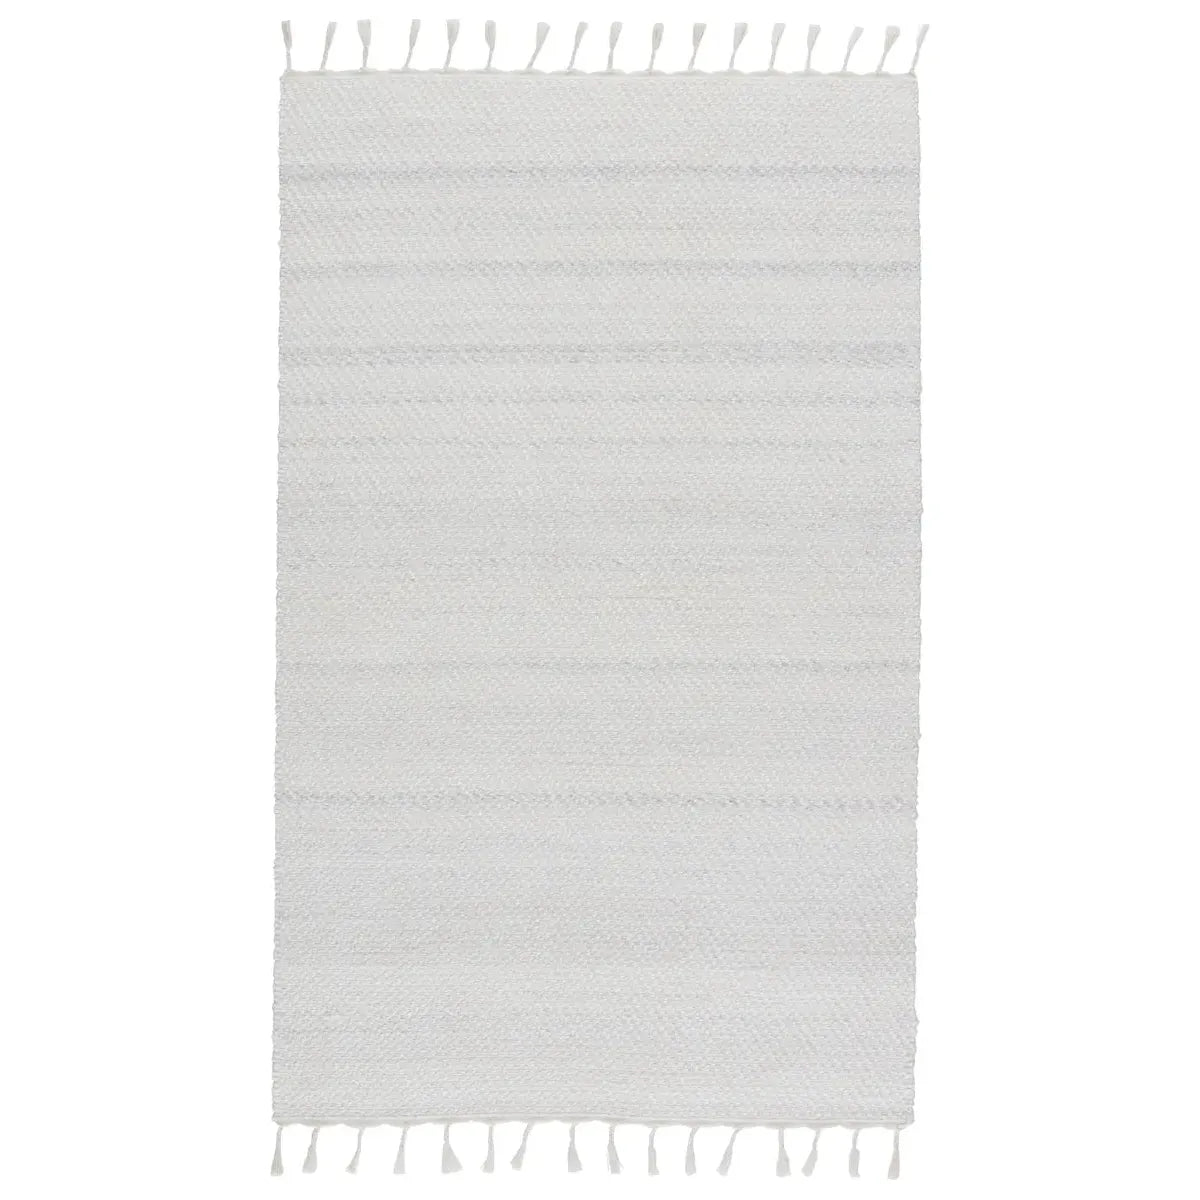 This Coronado Encanto Snow White Area Rug by Jaipur Living boasts a handwoven, heathered design to both high-traffic areas and outdoor spaces. The Encanto area rug provides a relaxed, grounding accent to patios, kitchens, and dining rooms with durable PET yarn. 